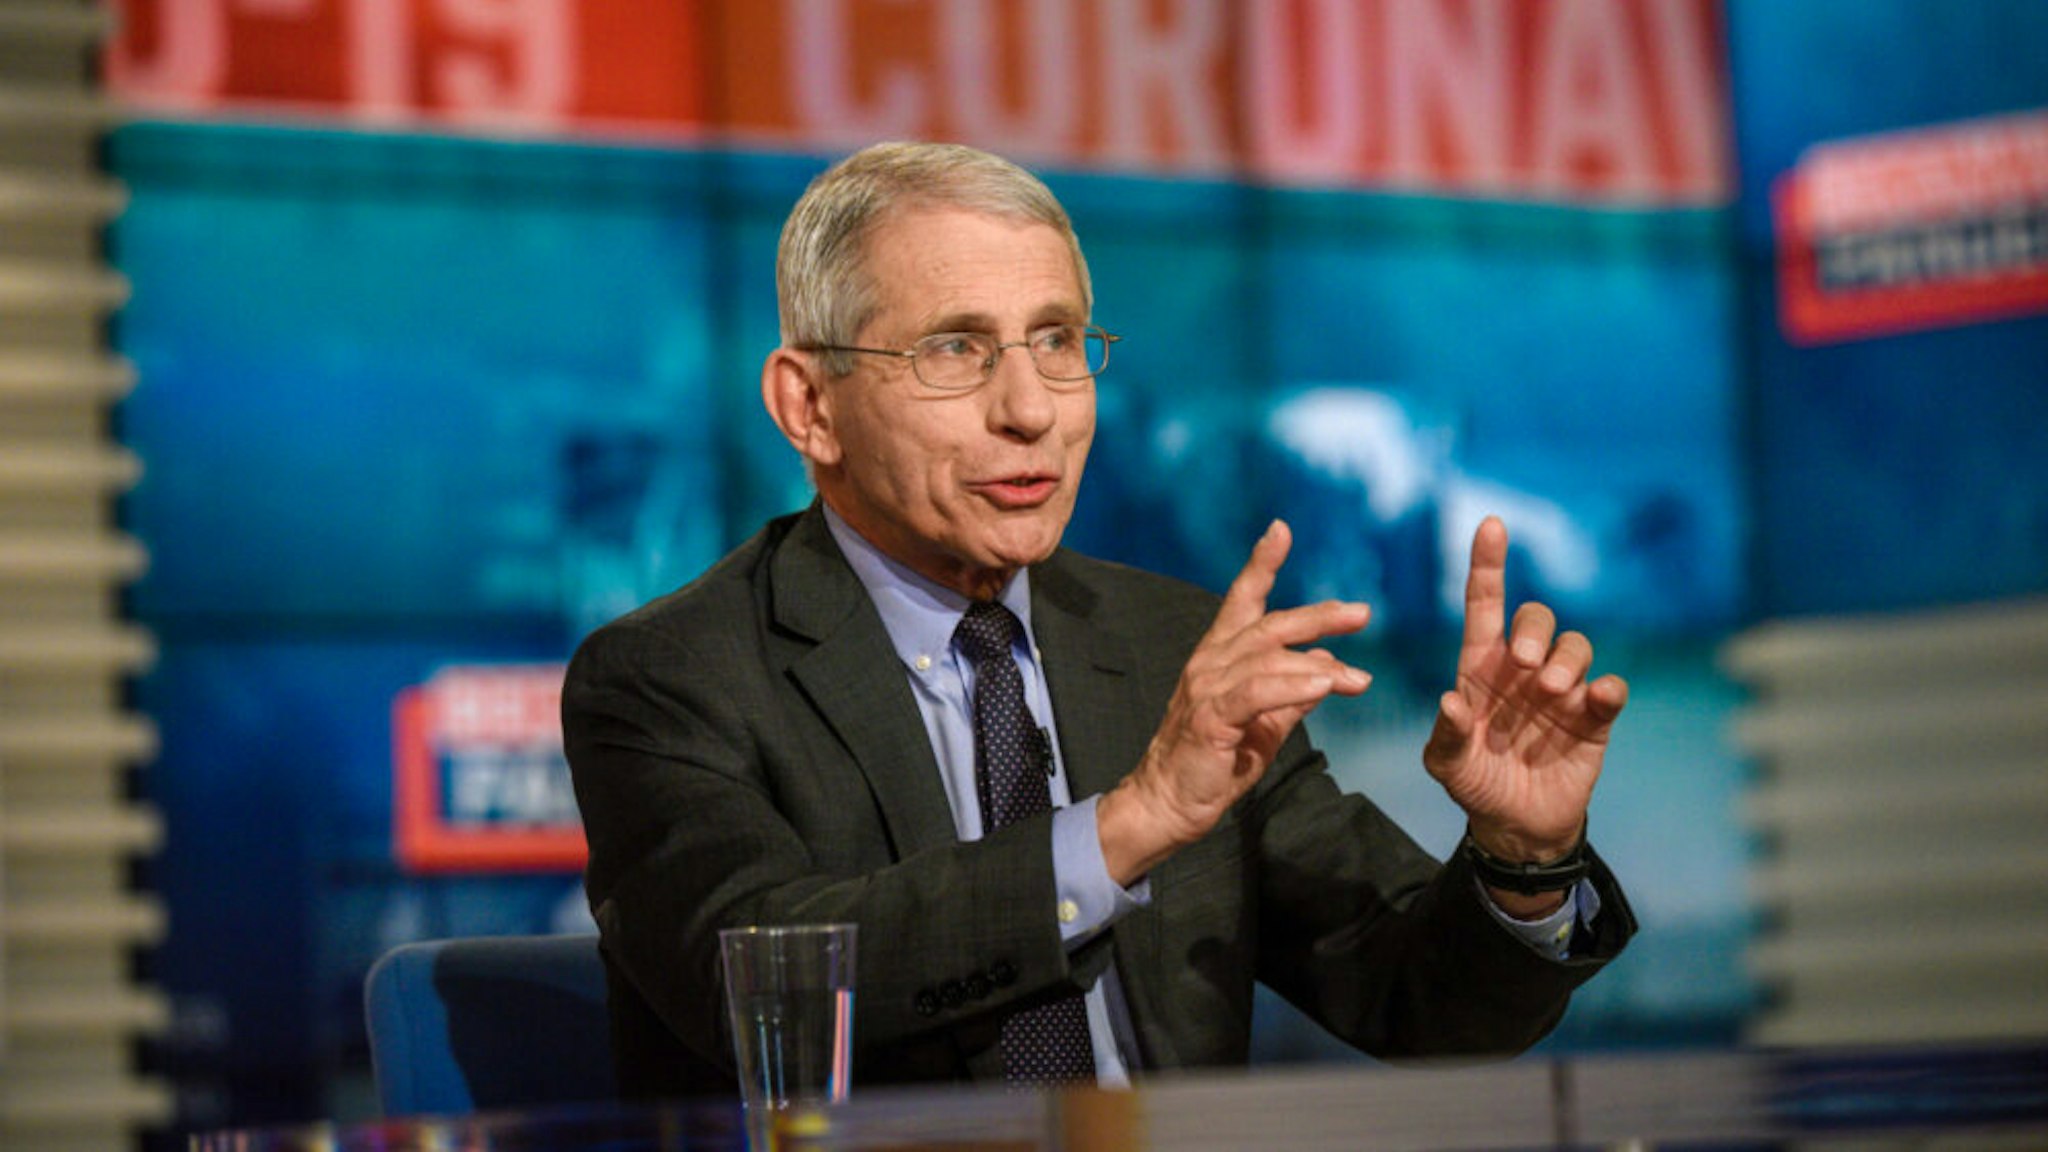 Dr. Anthony Fauci, Director, National Institute of Allergy and Infectious Diseases, appears on Meet the Press" in Washington, D.C., Sunday, March 15, 2020.